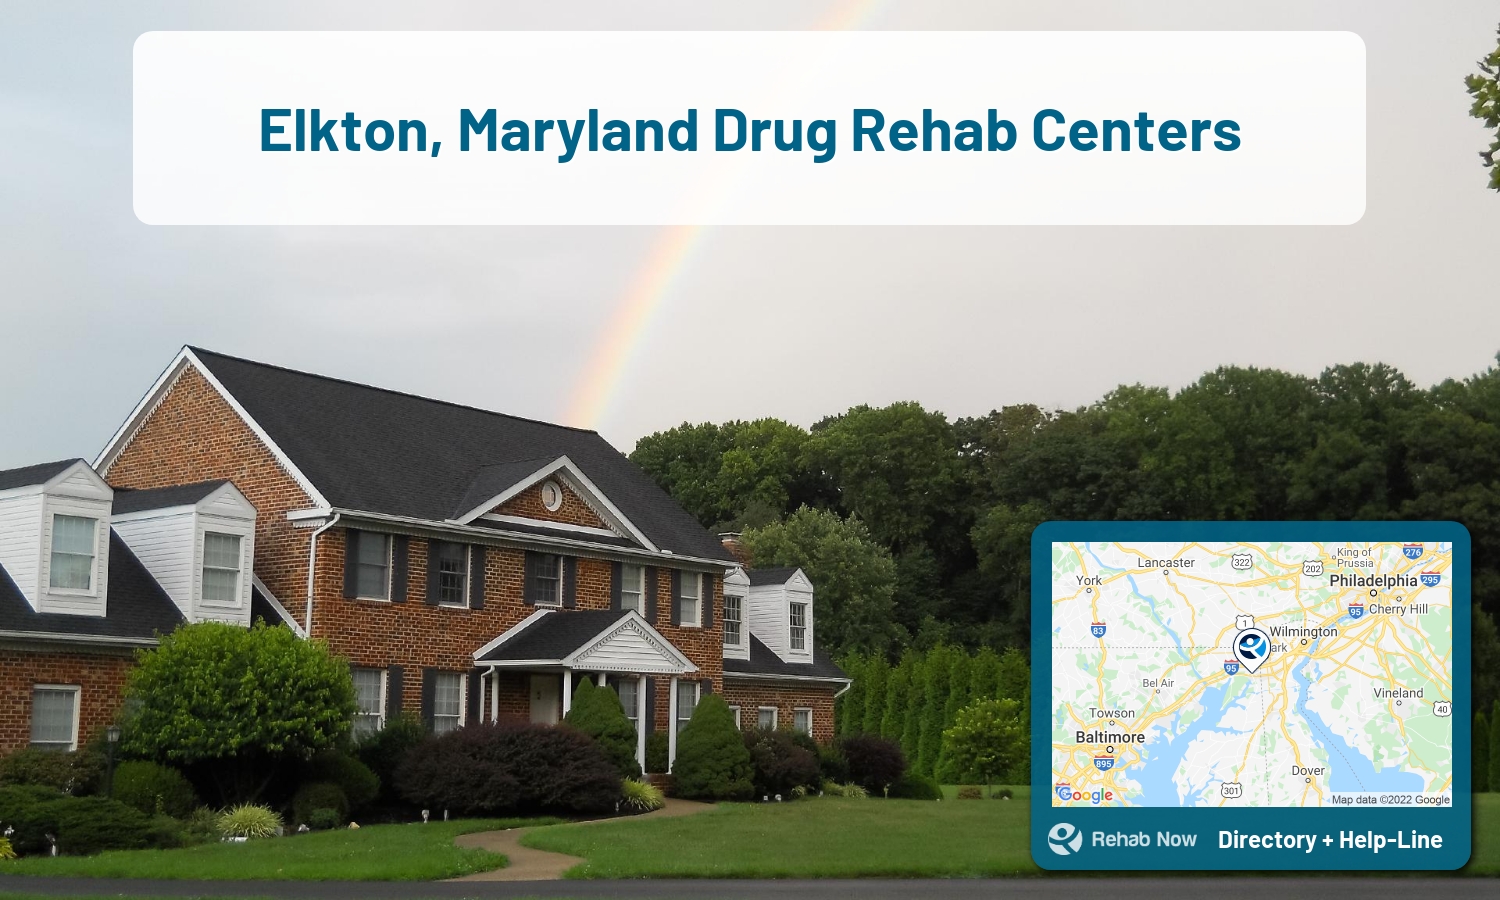 Elkton, MD Treatment Centers. Find drug rehab in Elkton, Maryland, or detox and treatment programs. Get the right help now!